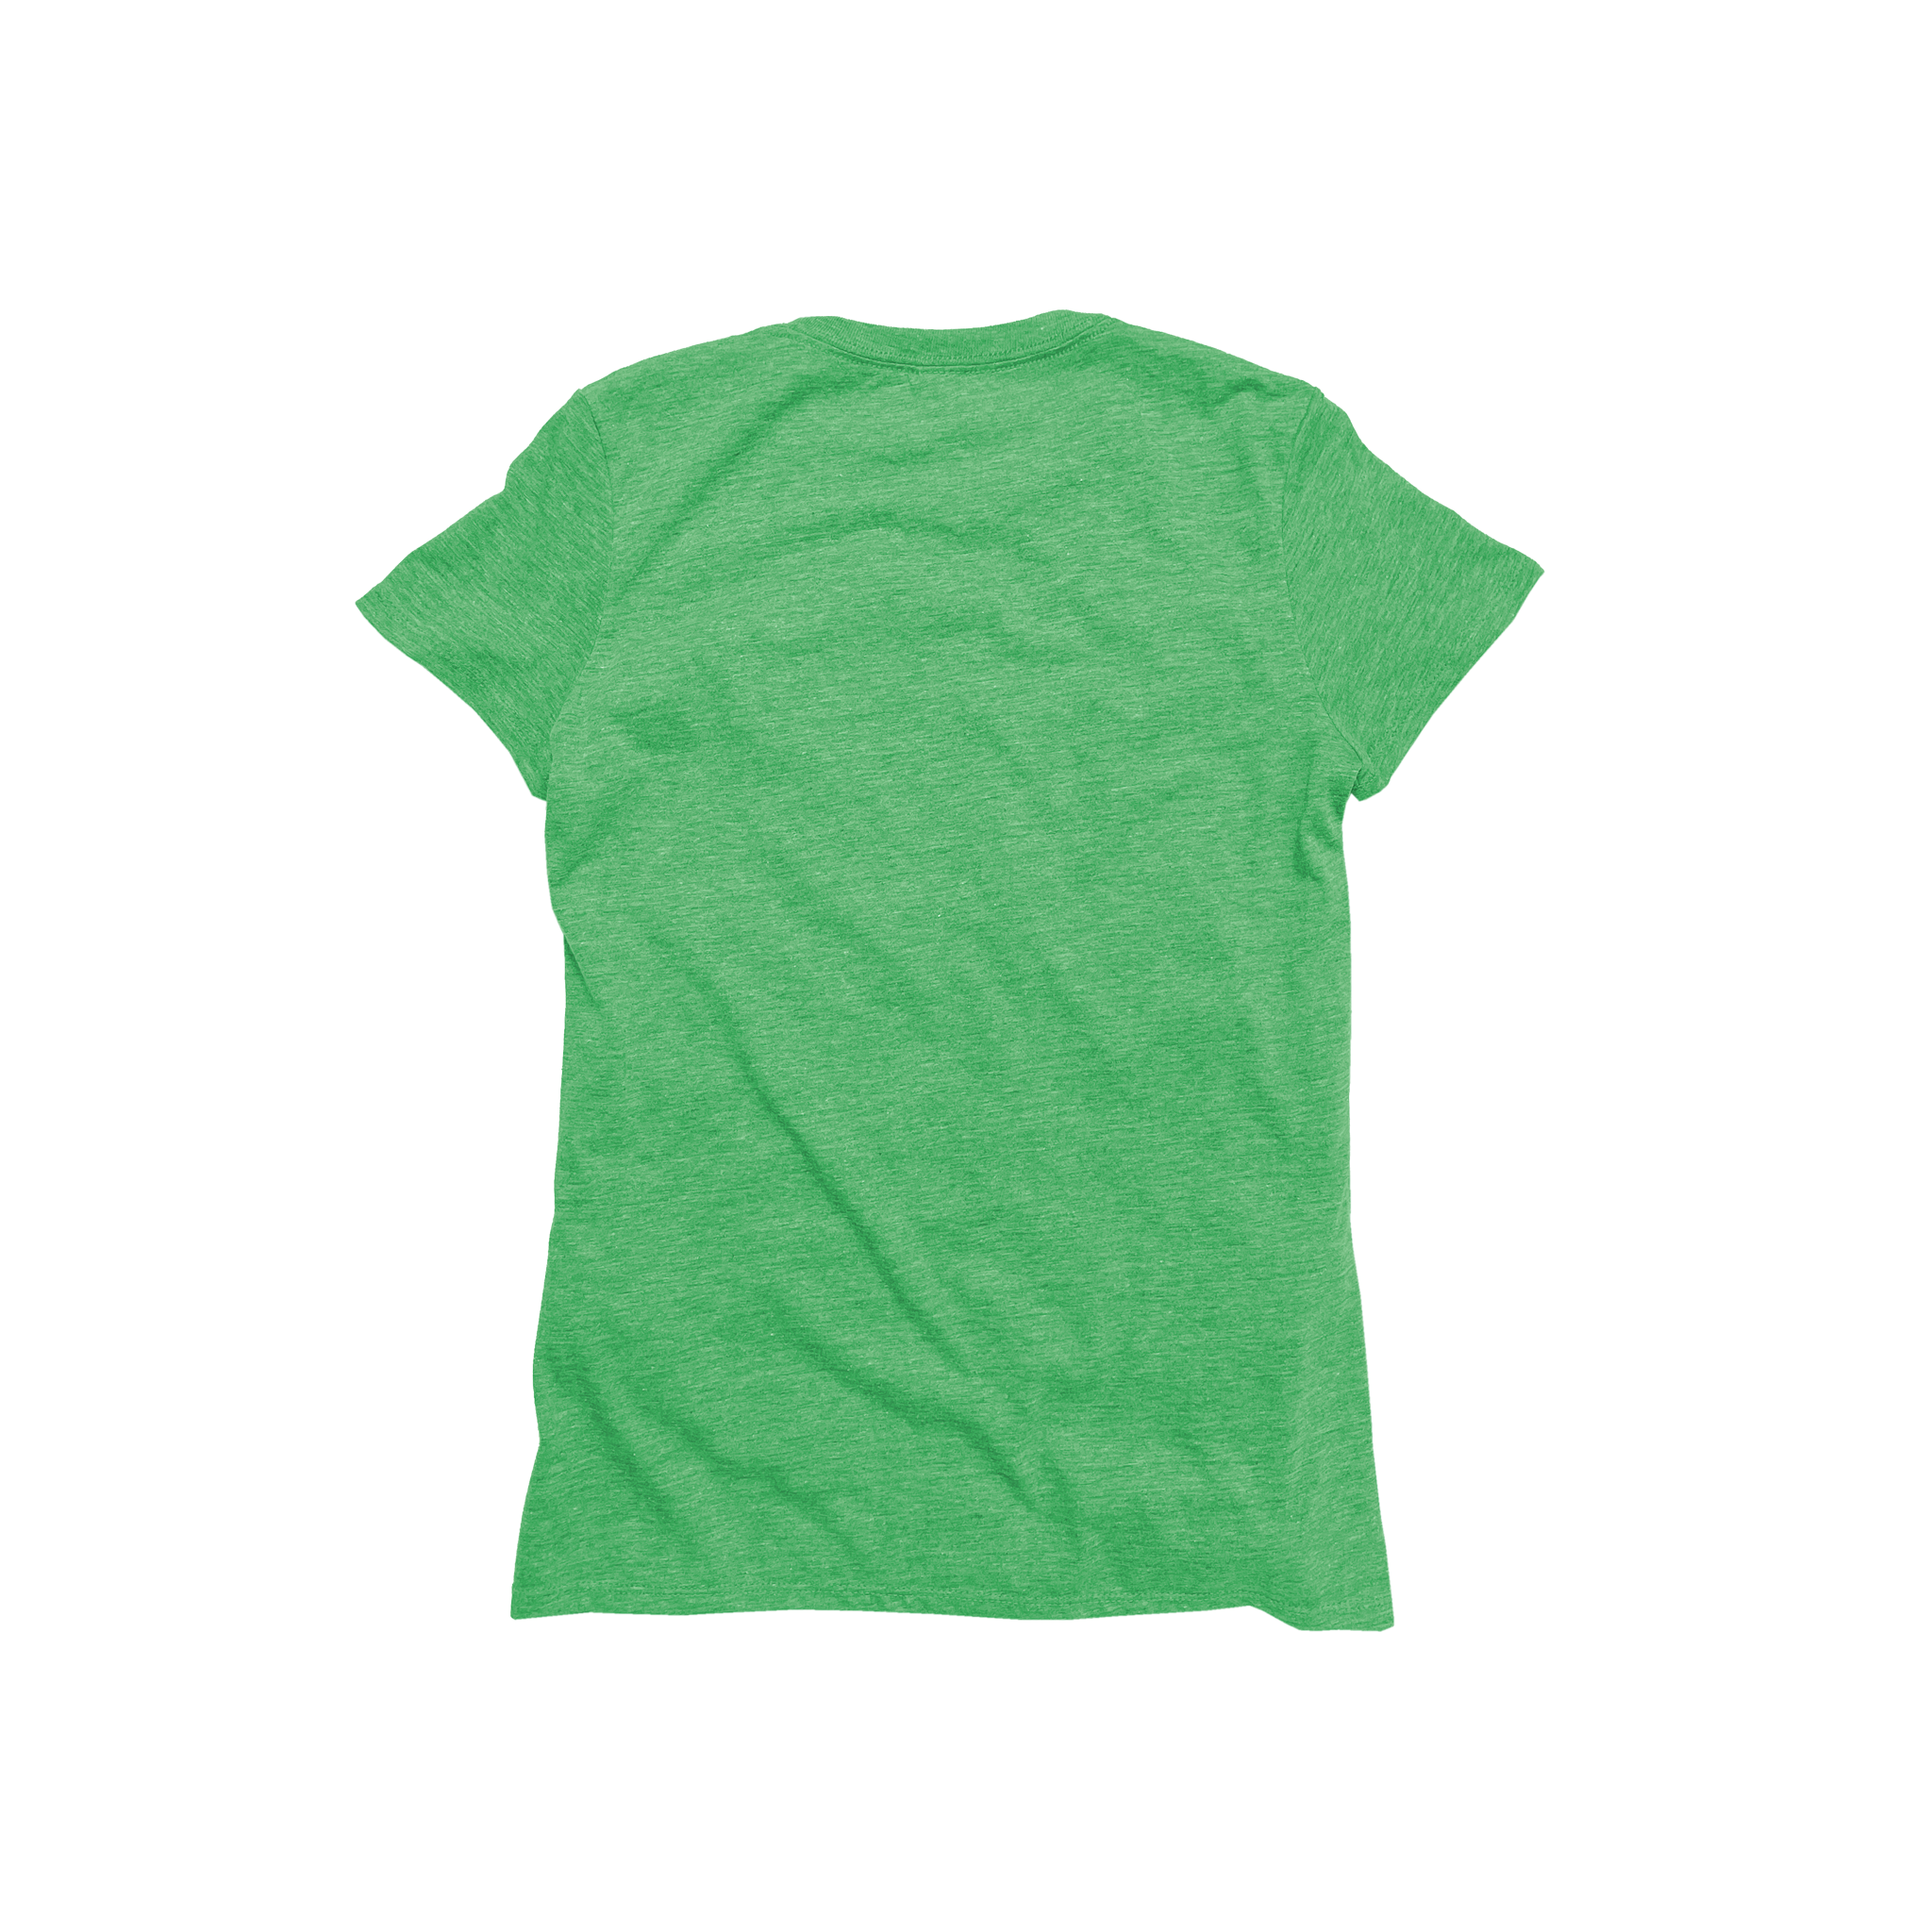 Back Flat Lay of GOEX Ladies Eco Triblend Tee in Grass